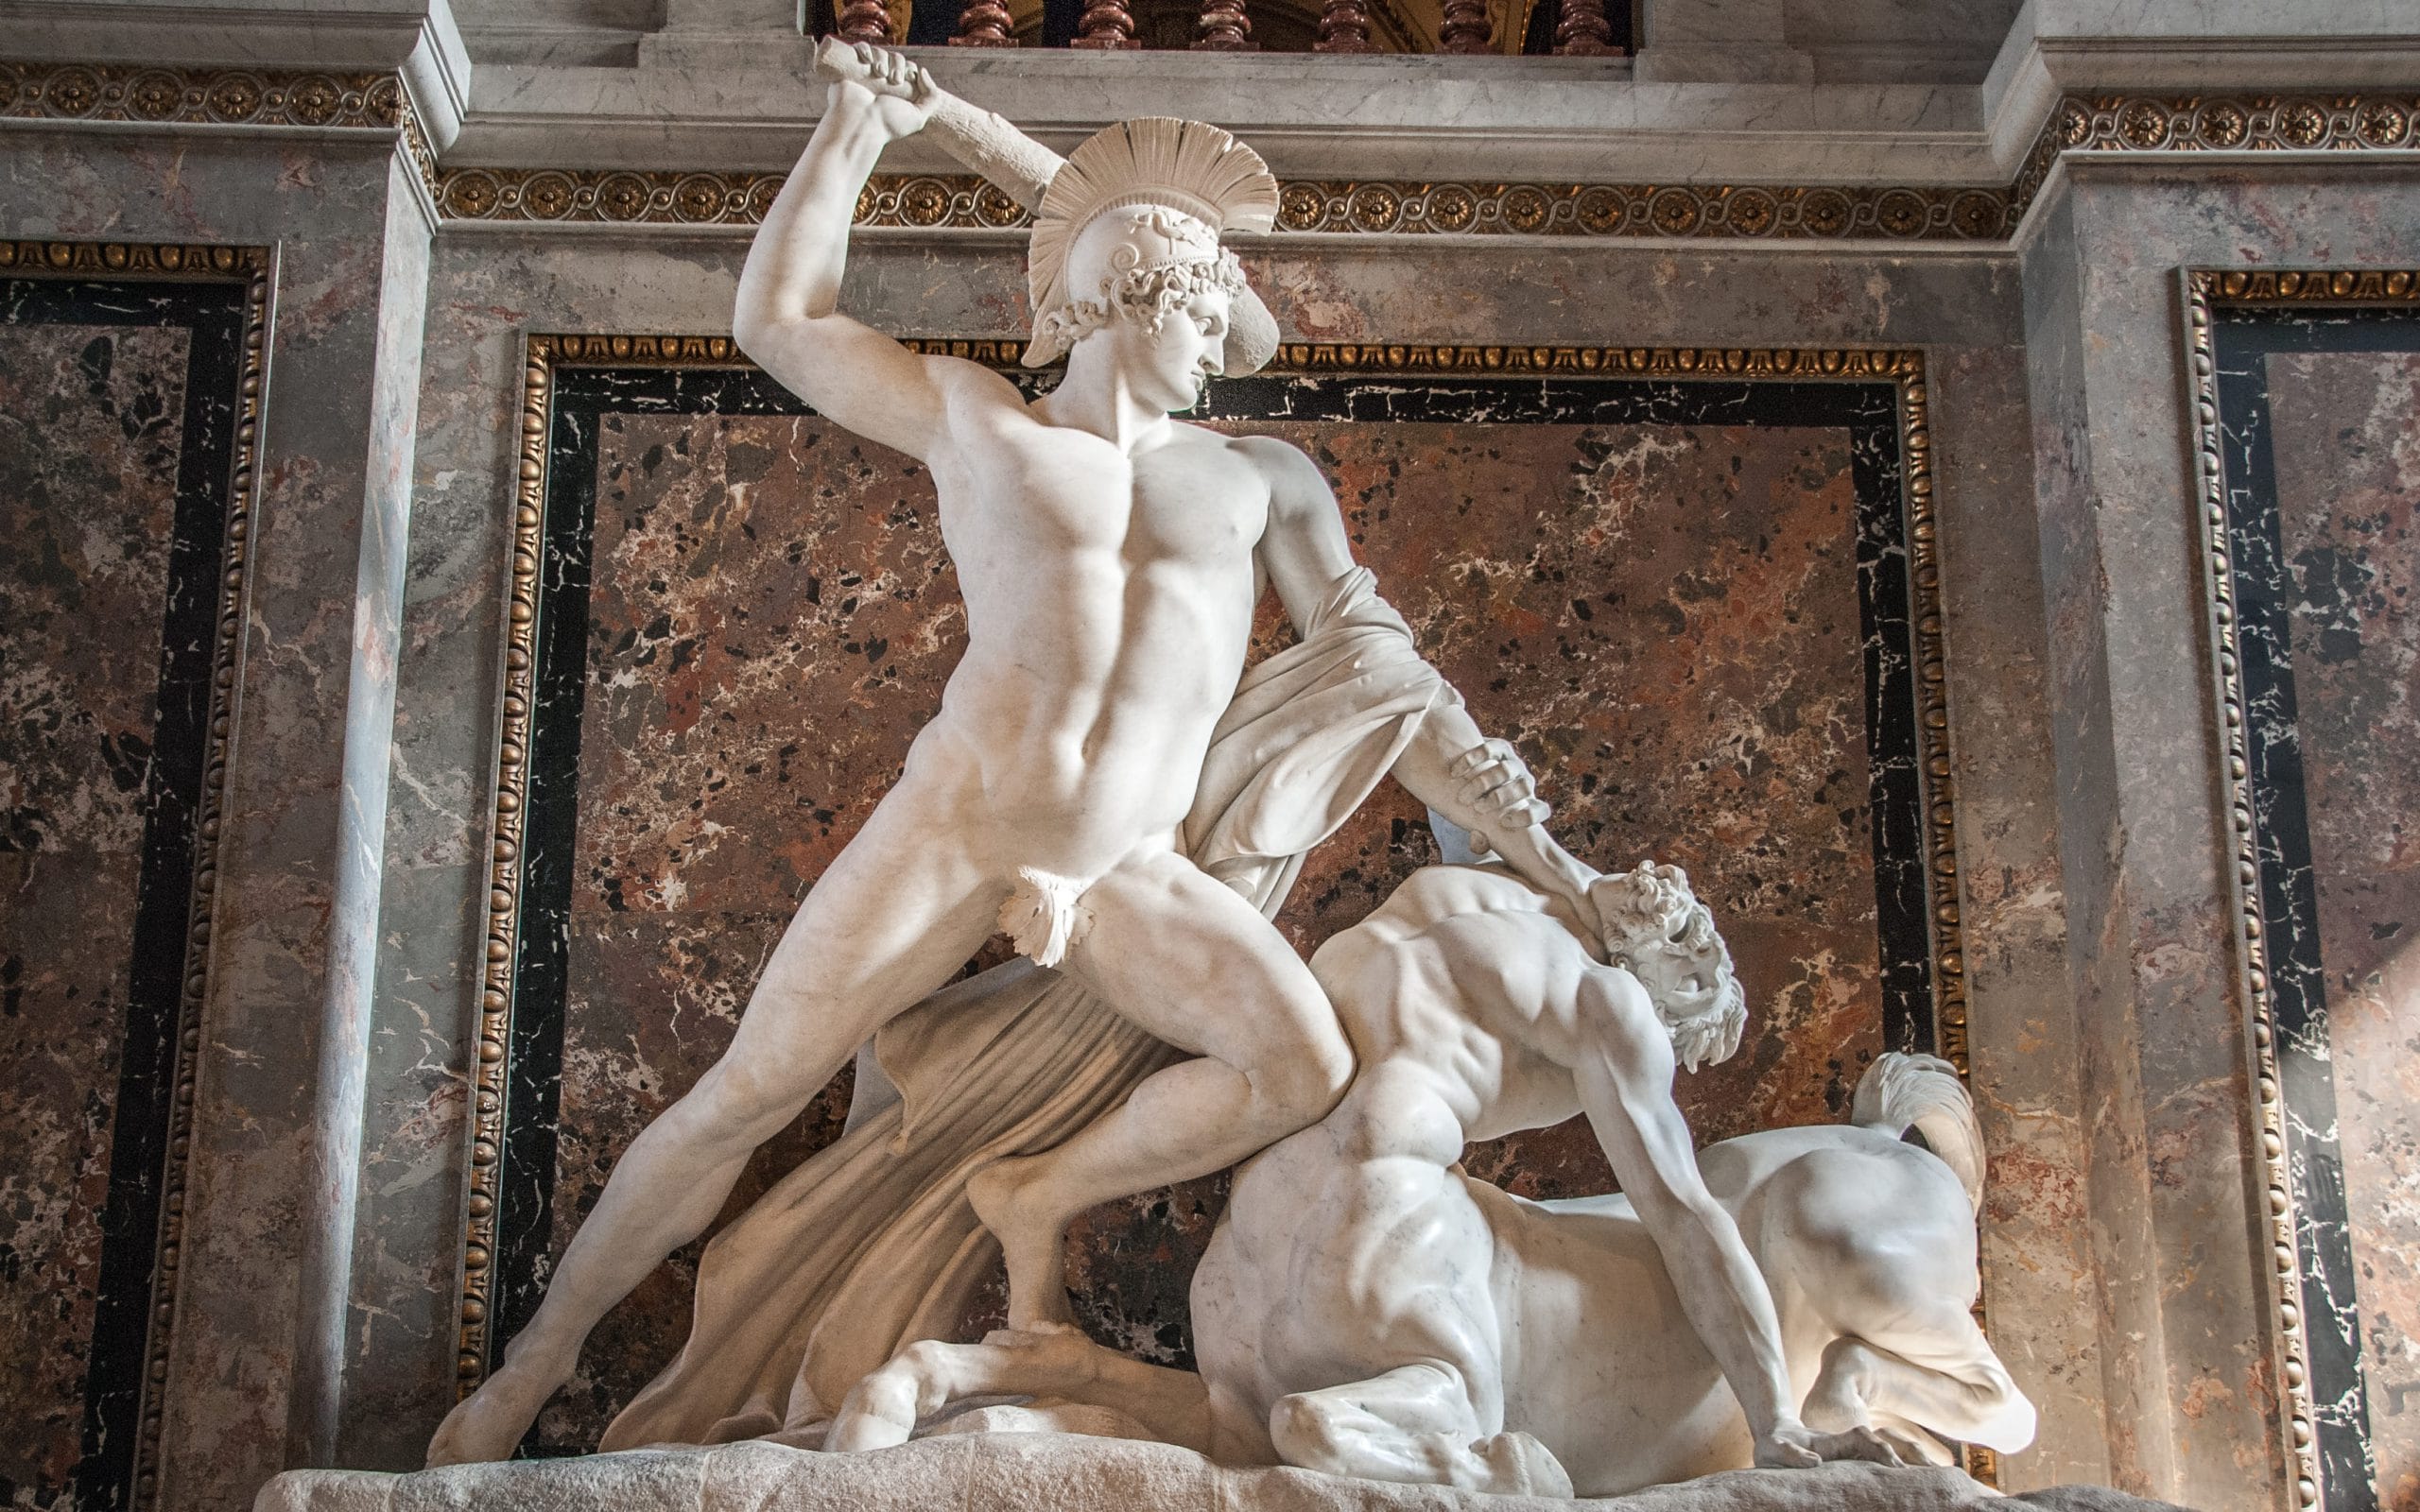 From drawing to marble: Antonio Canova